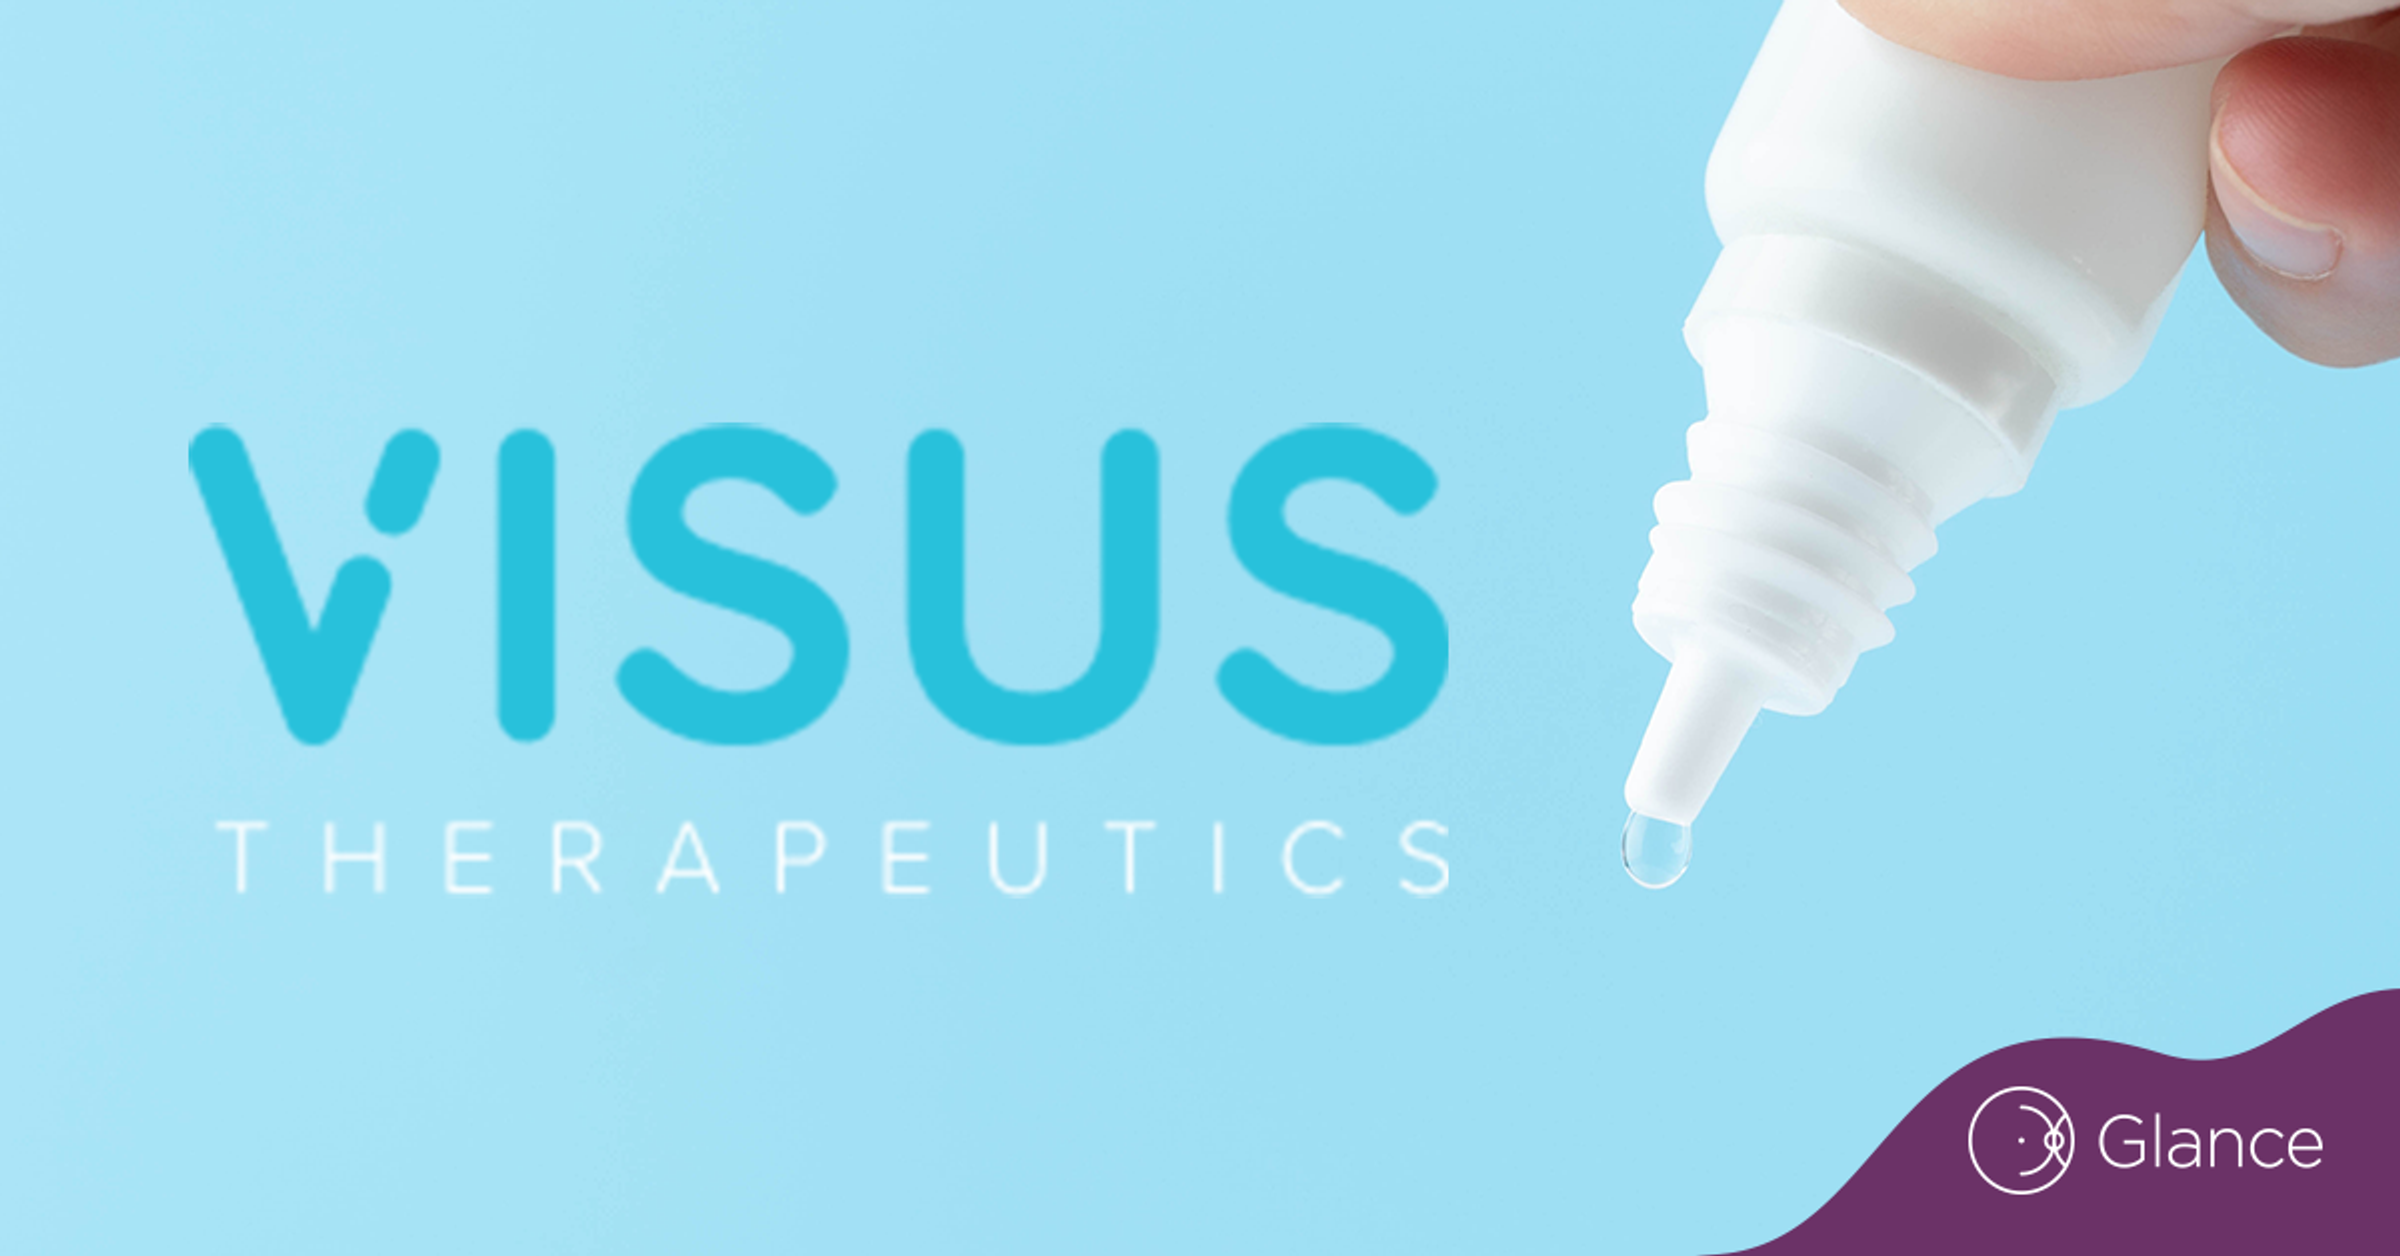 Visus completes enrollment for phase 3 trial of Brimochol PF for presbyopia